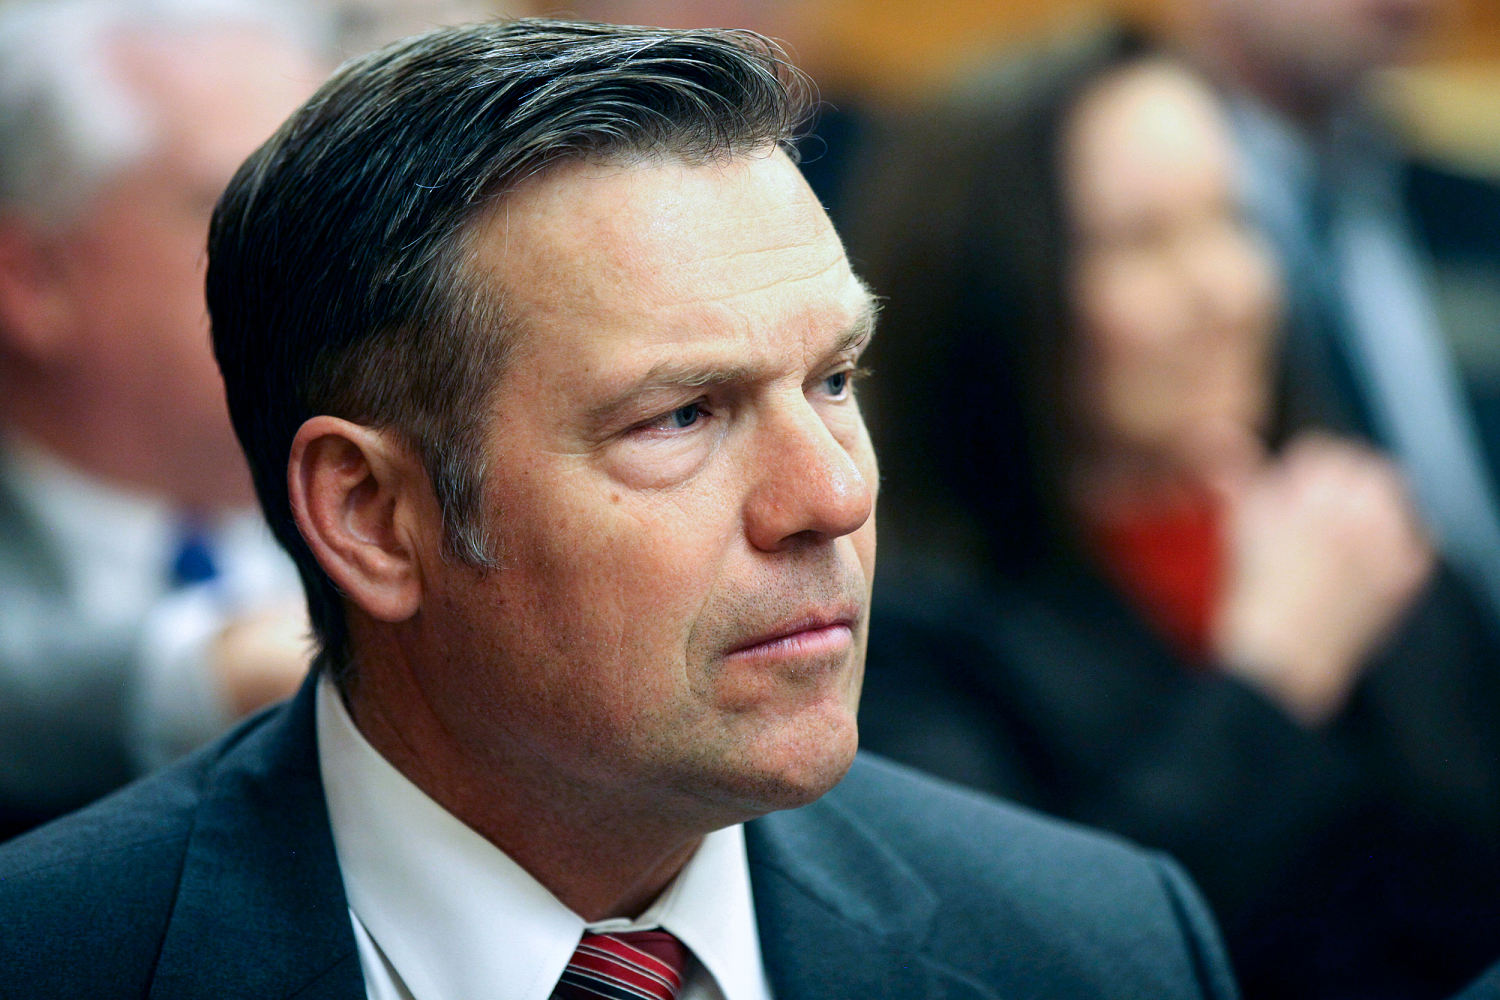 kansas ag says schools can't hide trans kids’ gender identities from parents